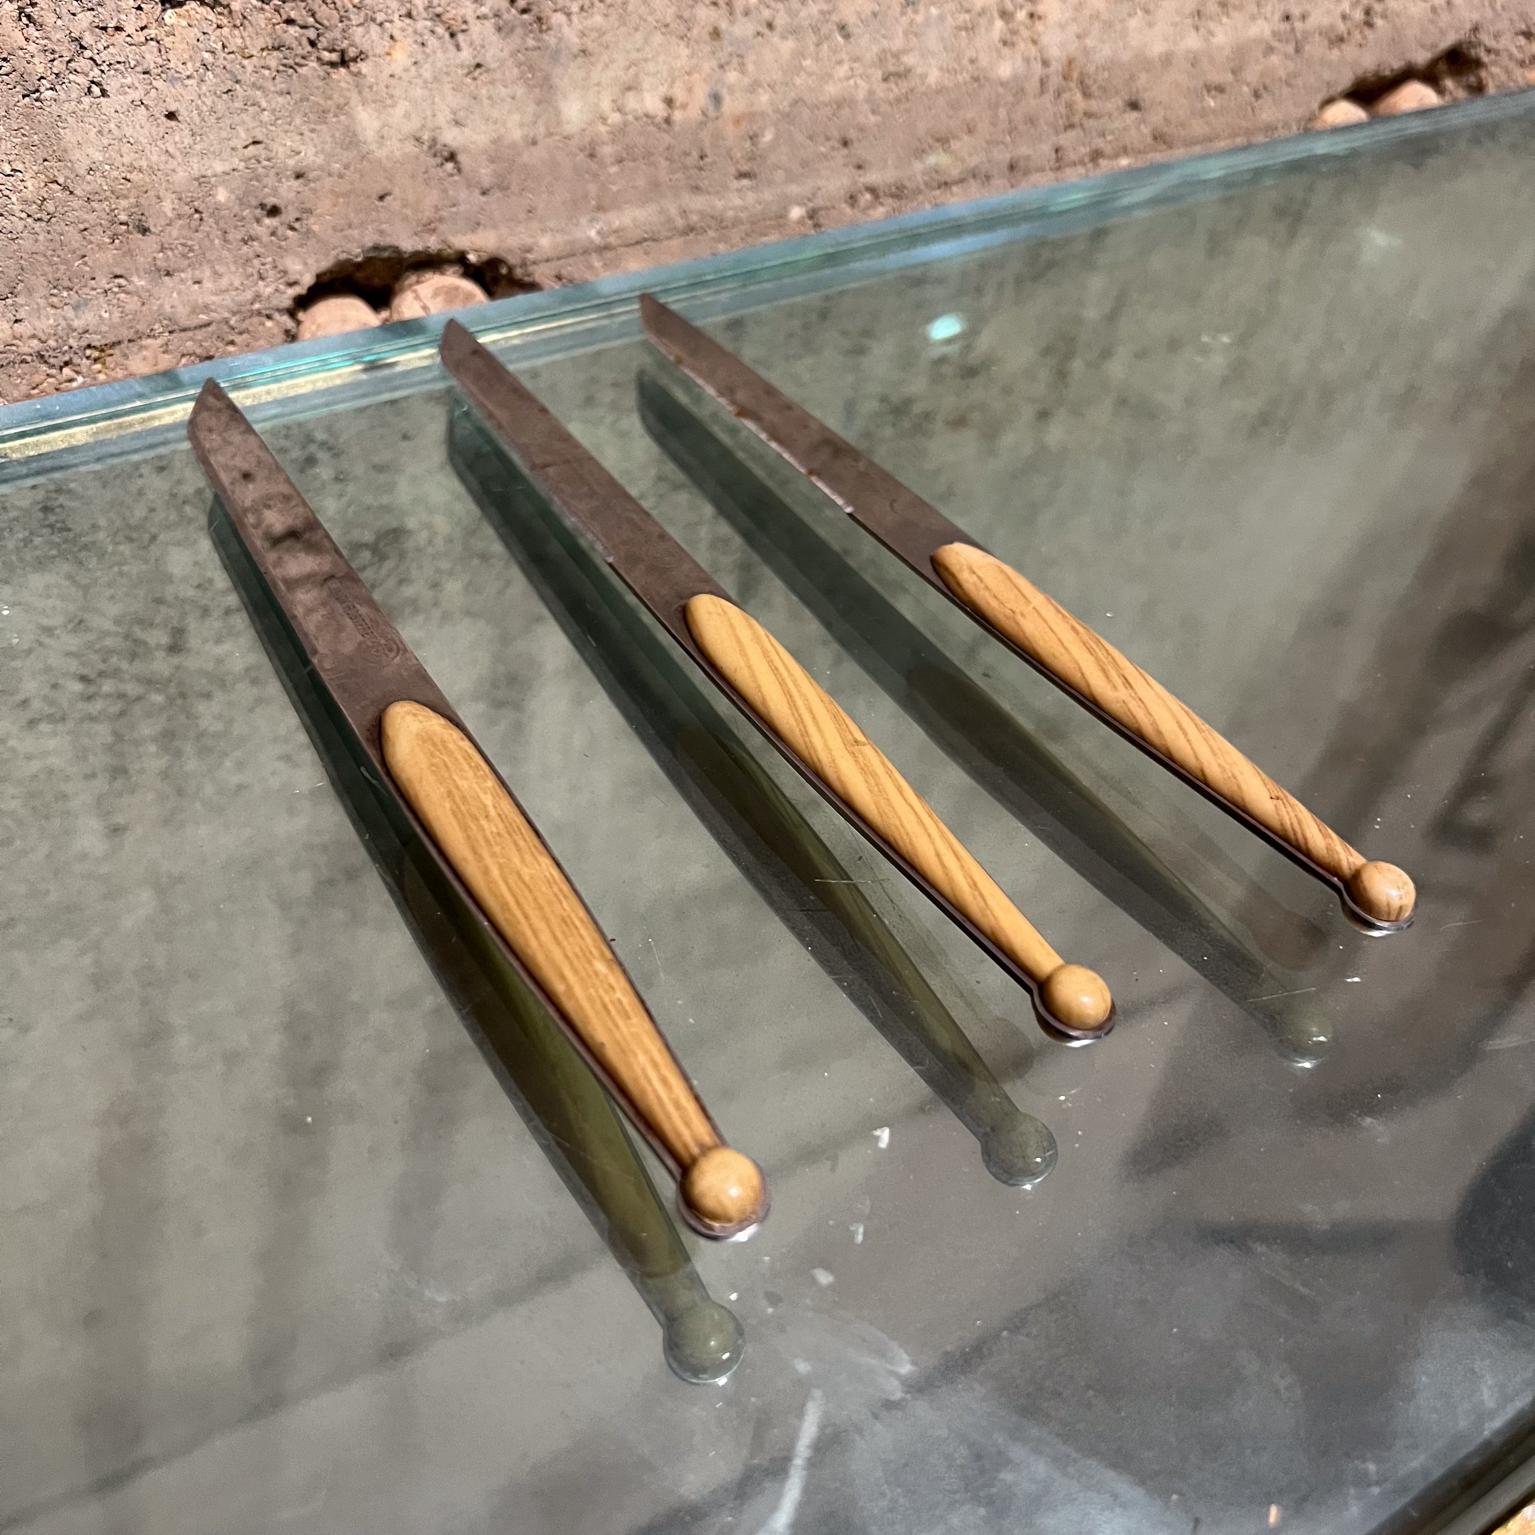 1950s Modernist Three Sculptural Steak Knives Inox Rostfrei
set of three
7 long x .25 d x .5 h
stamp Inox Rostfrei
Preowned vintage condition
Refer to images provided.